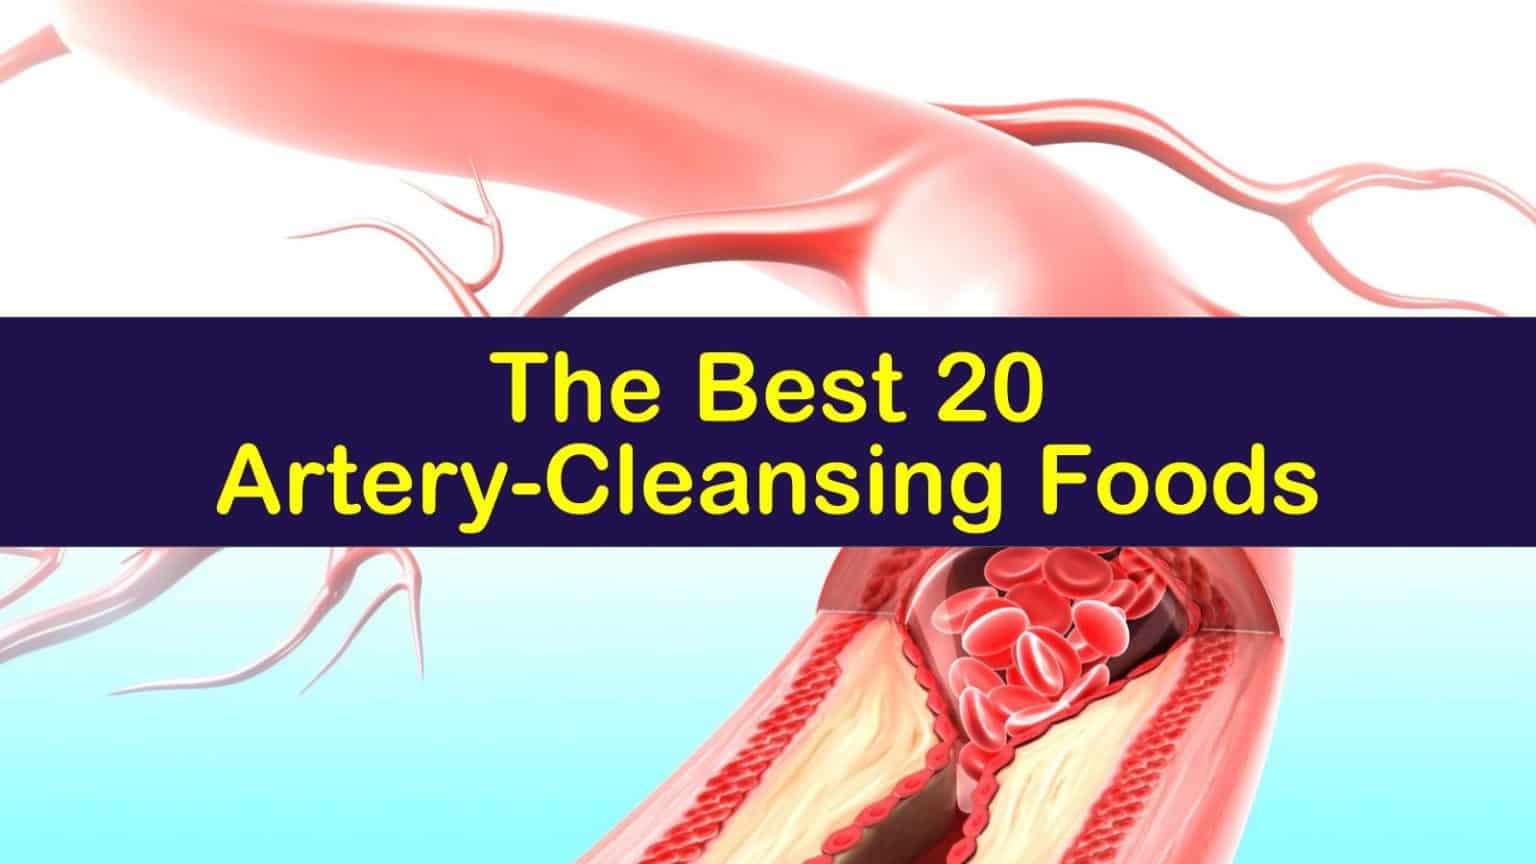 The Best 20 Artery-Cleansing Foods